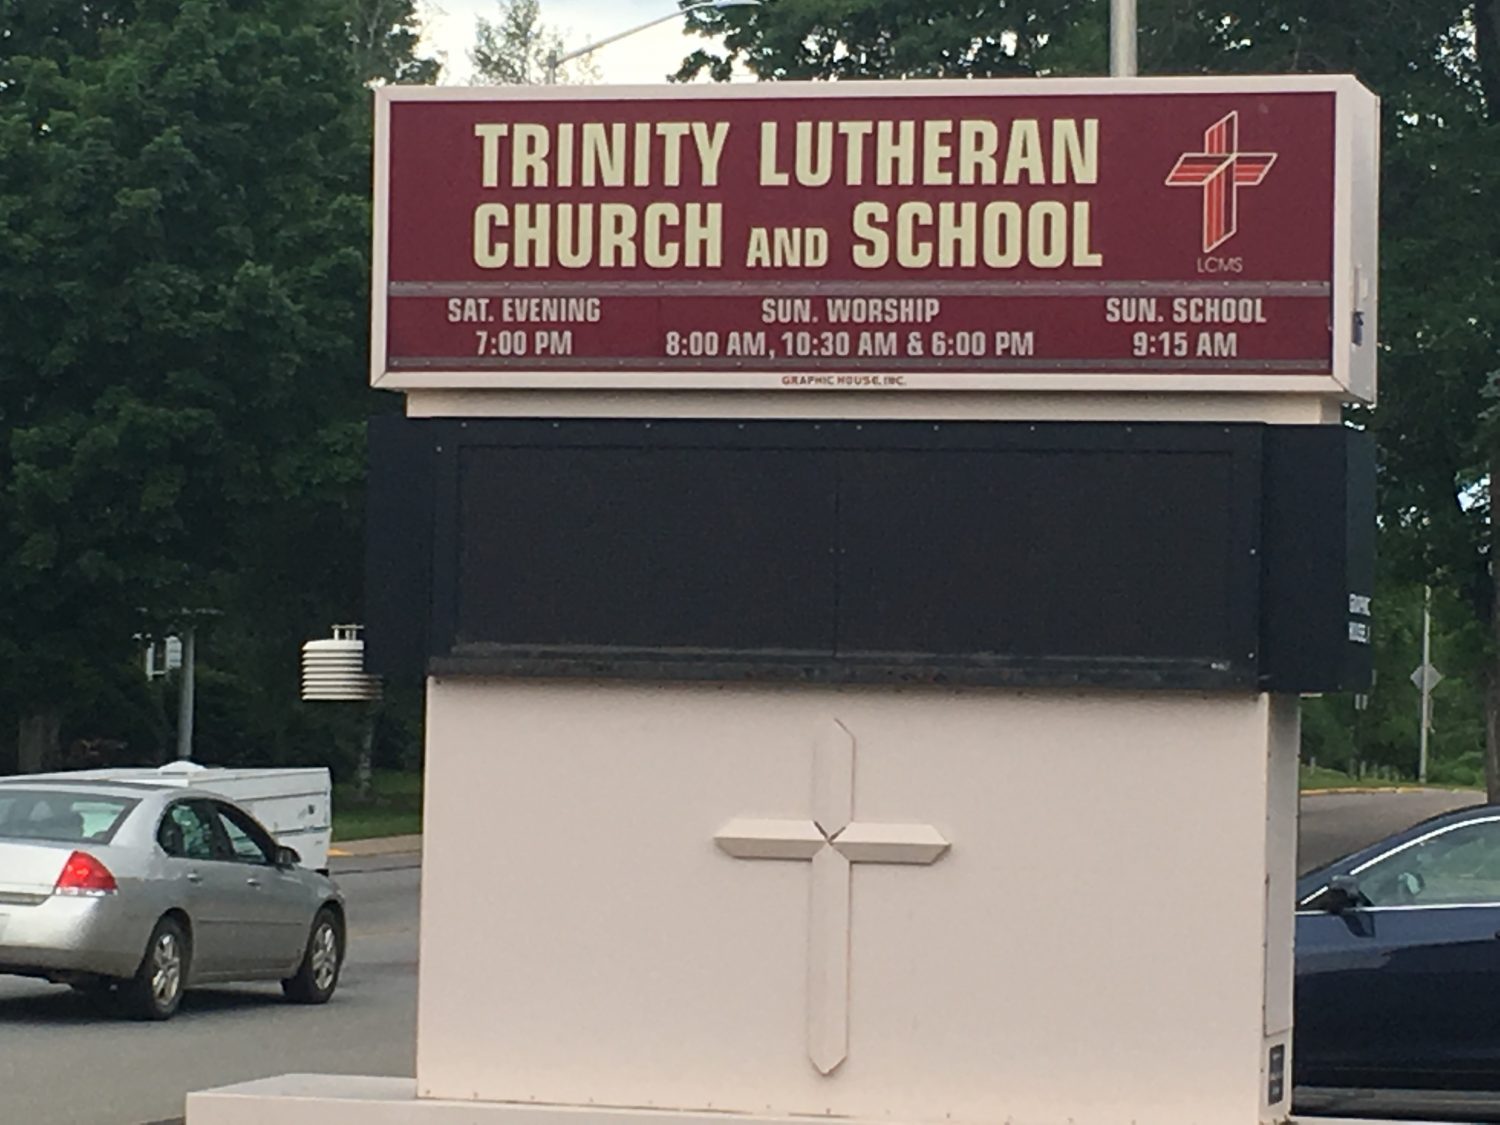 Trinity Lutheran School inducts NJHS members